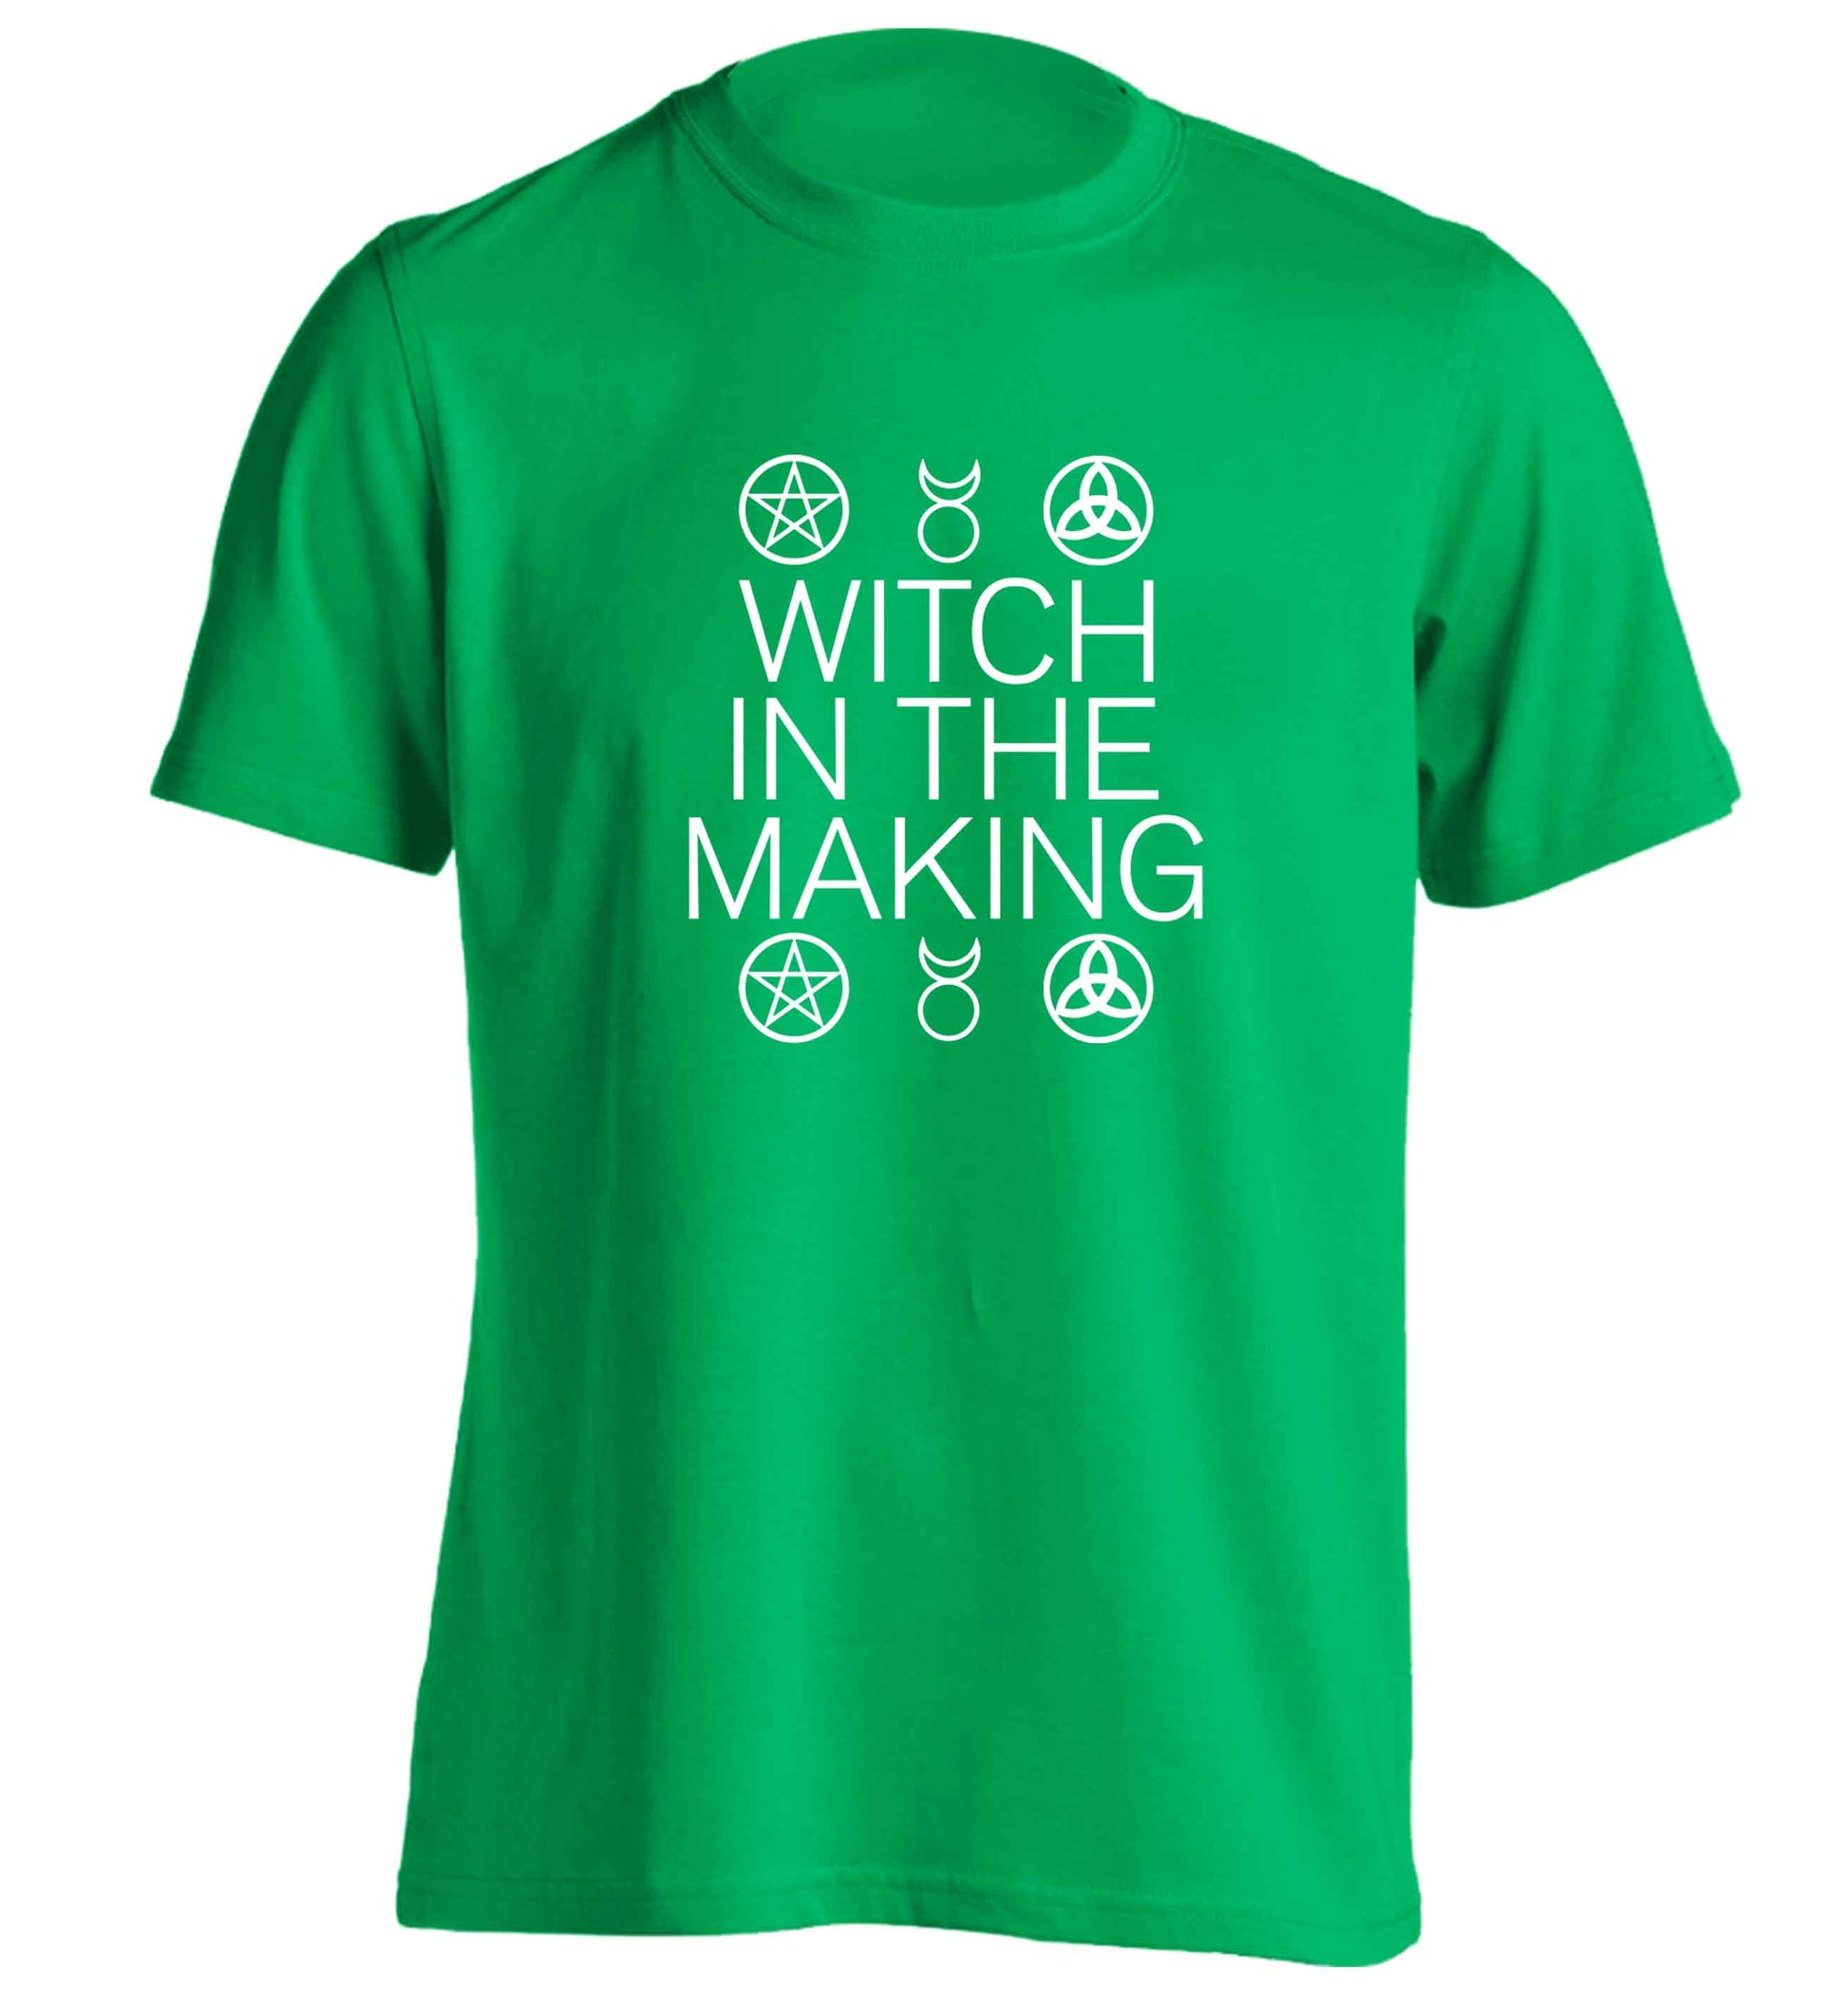 Witch in the making adults unisex green Tshirt 2XL